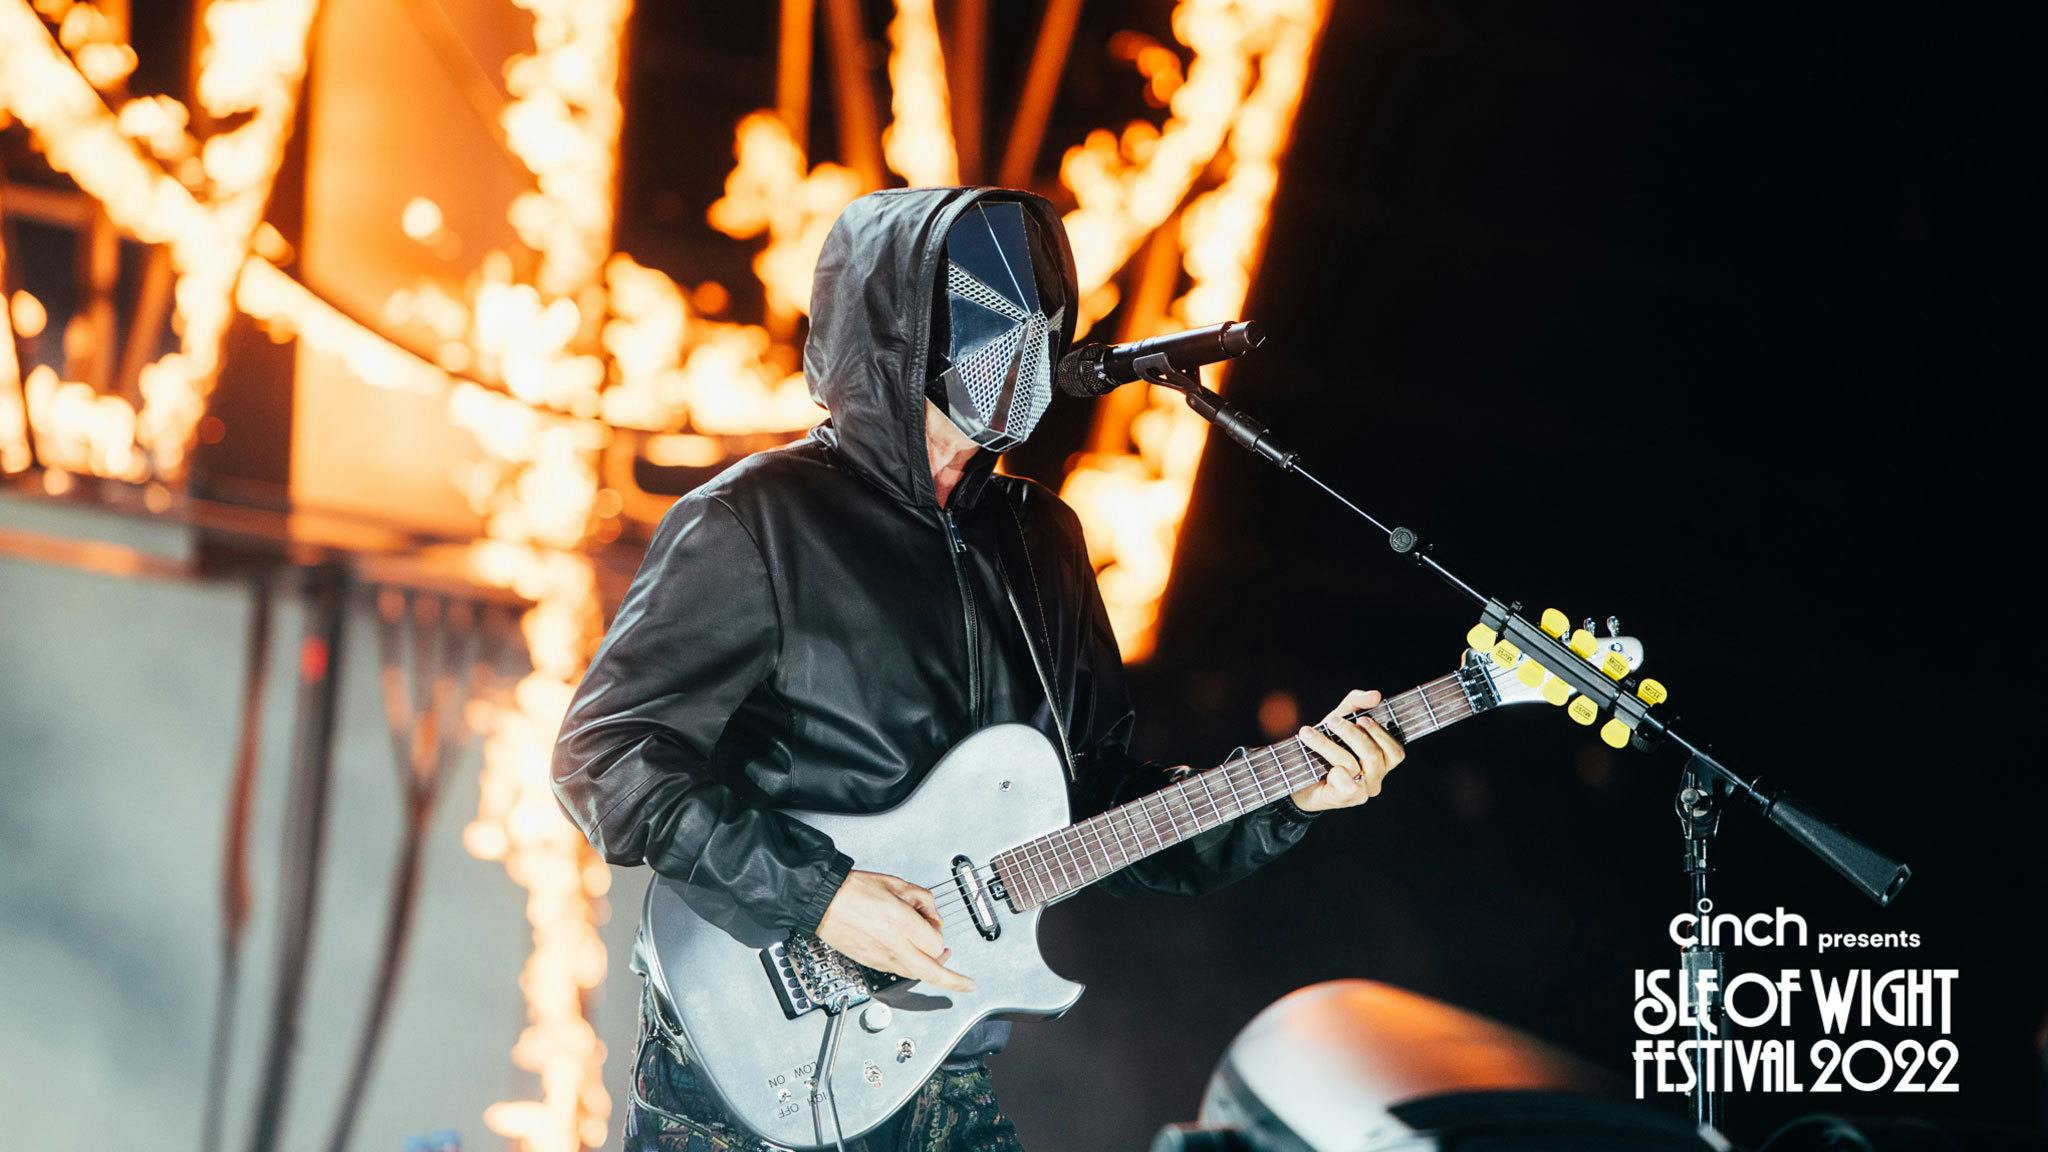 Muse bring epic show to Isle of Wight, jam Slipknot and Guns N’ Roses during set